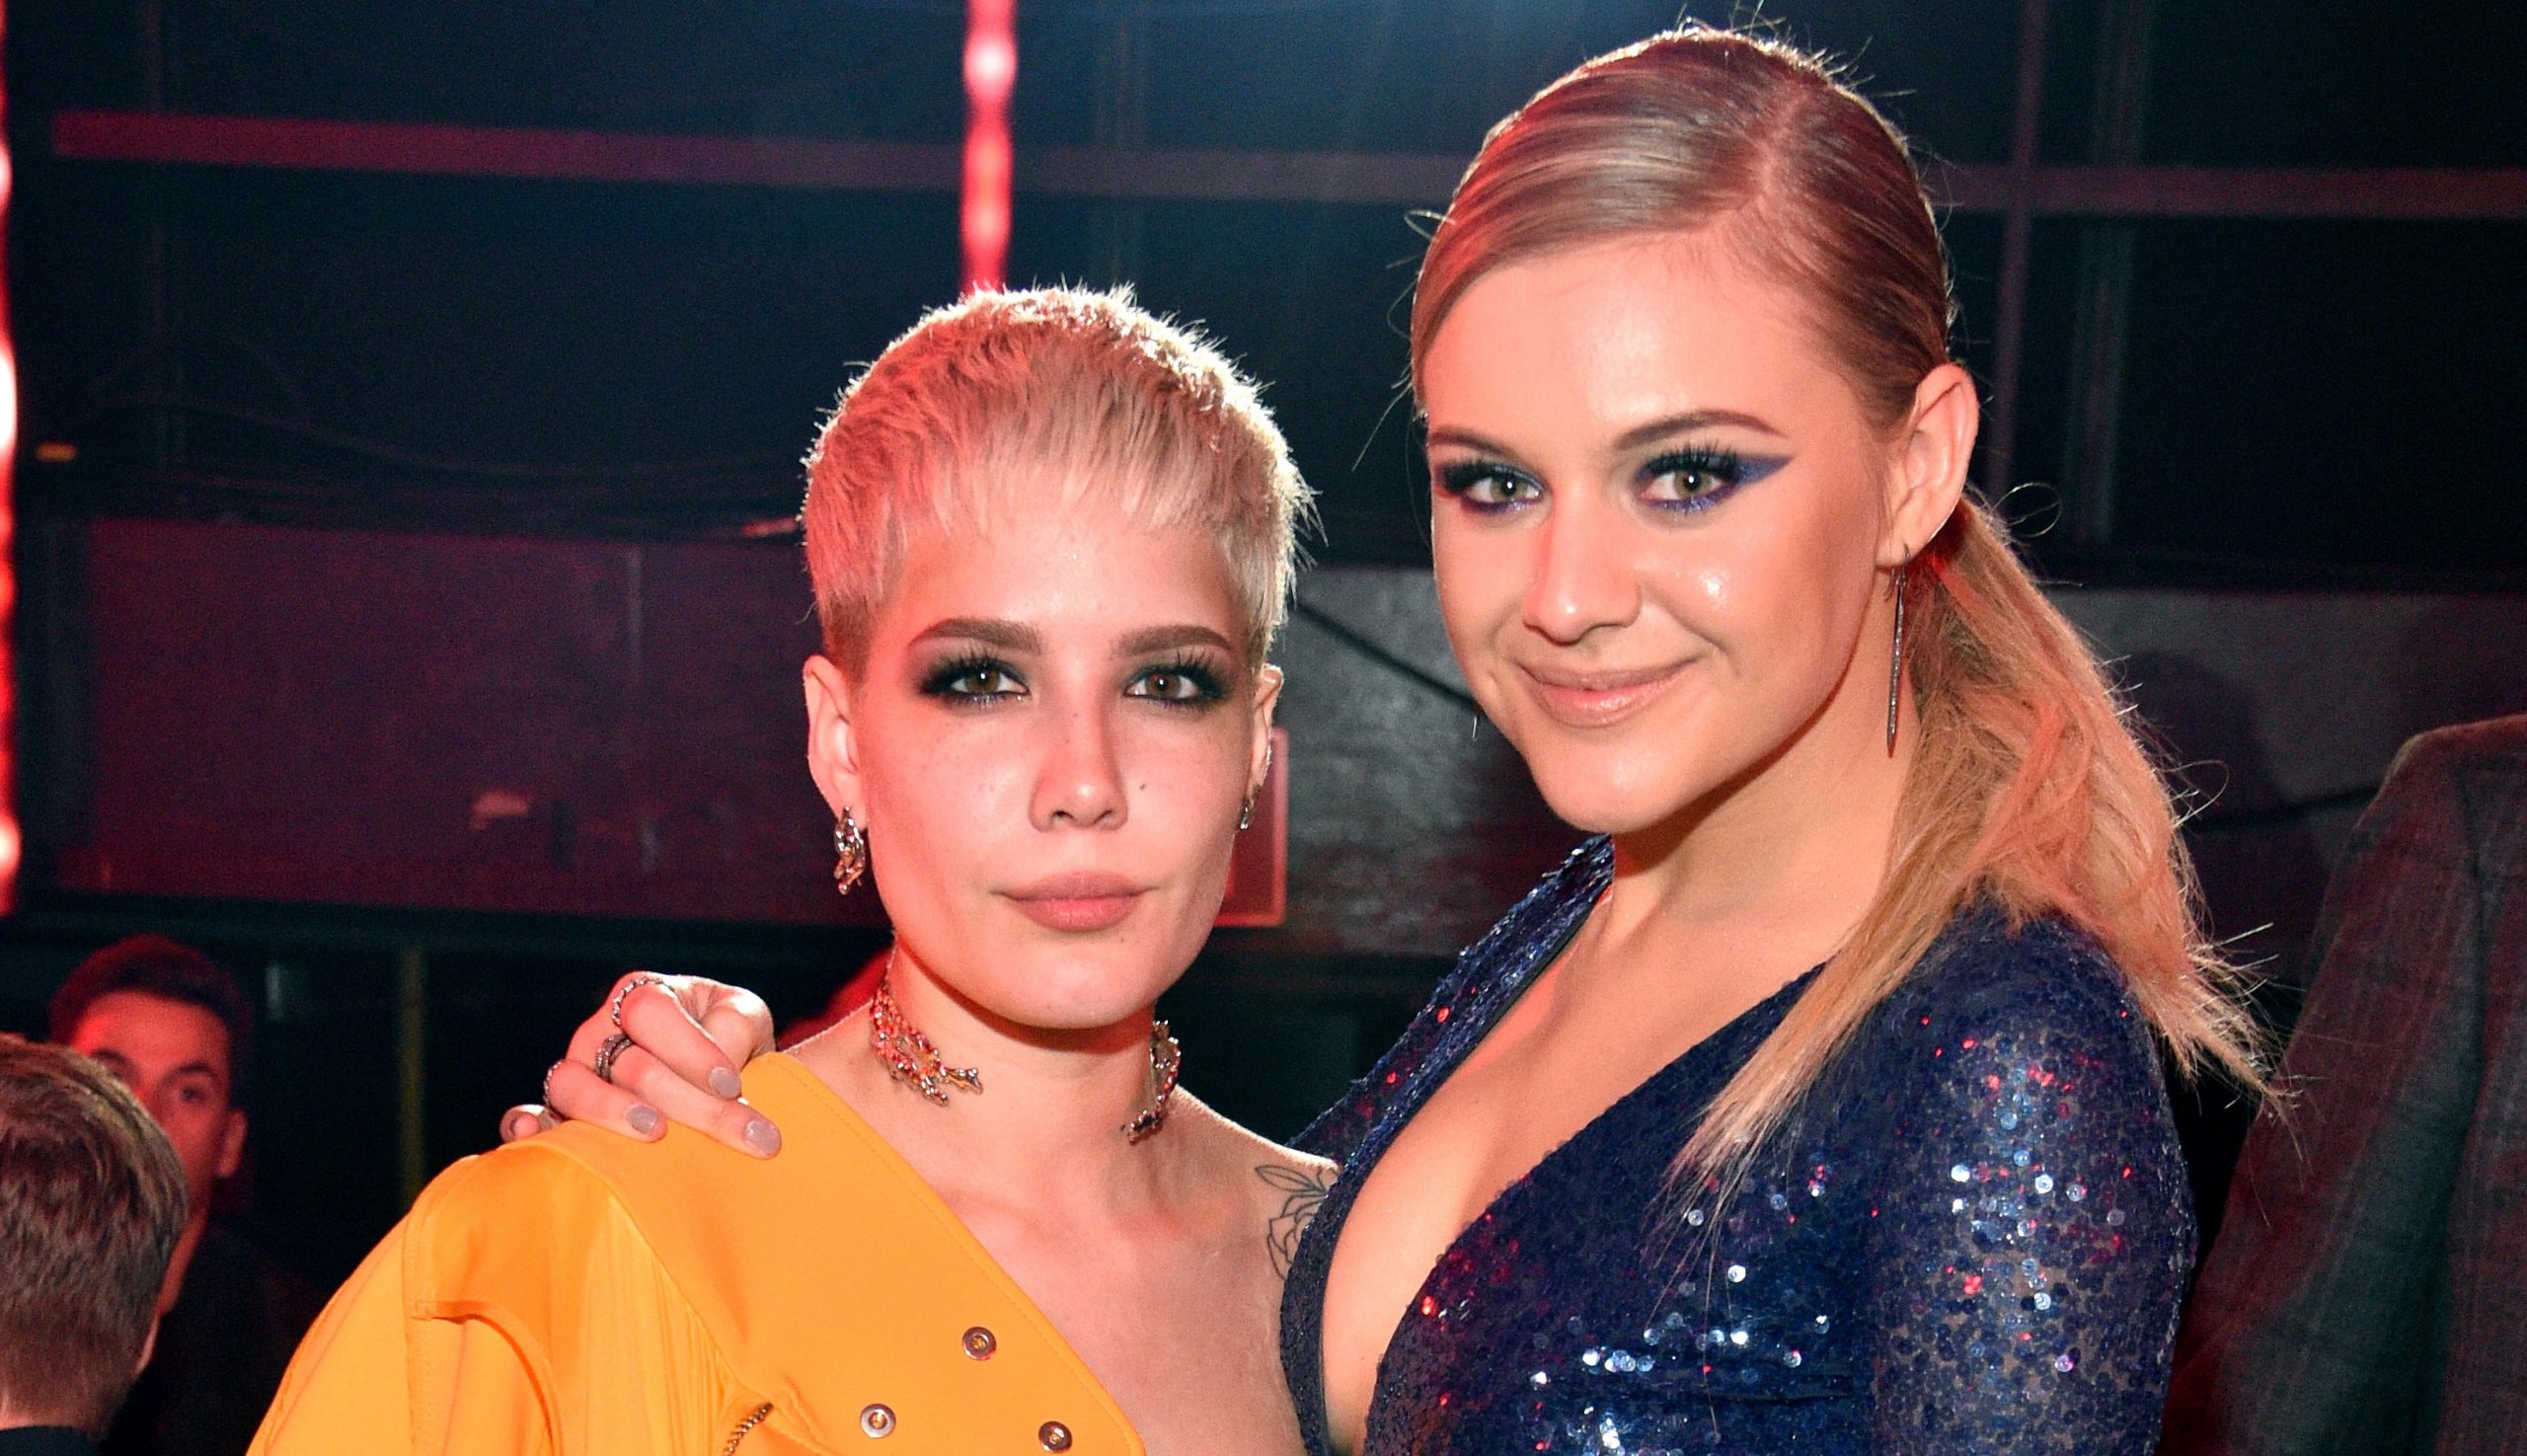 Kelsea Ballerini and Halsey Search for Truth in 'the other girl' Sounds